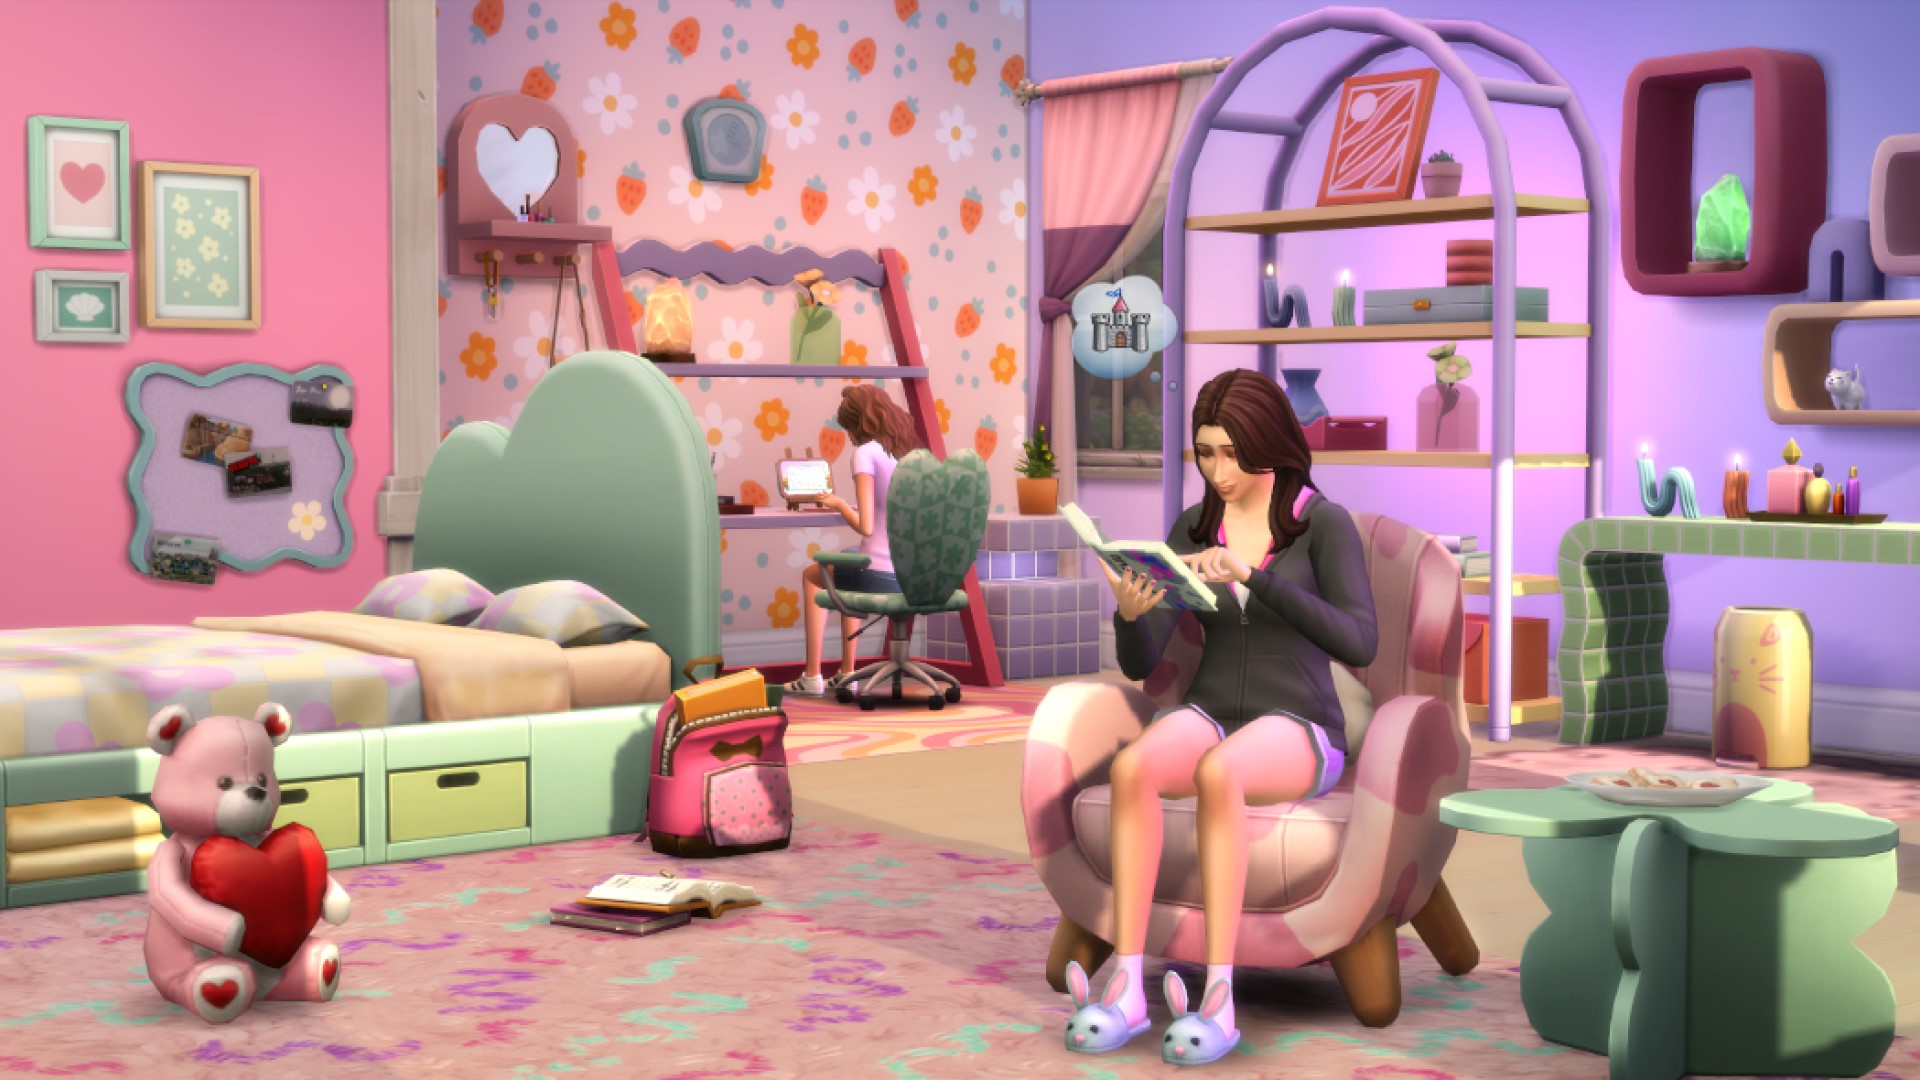 The Sims 4 new kits will add clutter or coziness to Sims’ homes